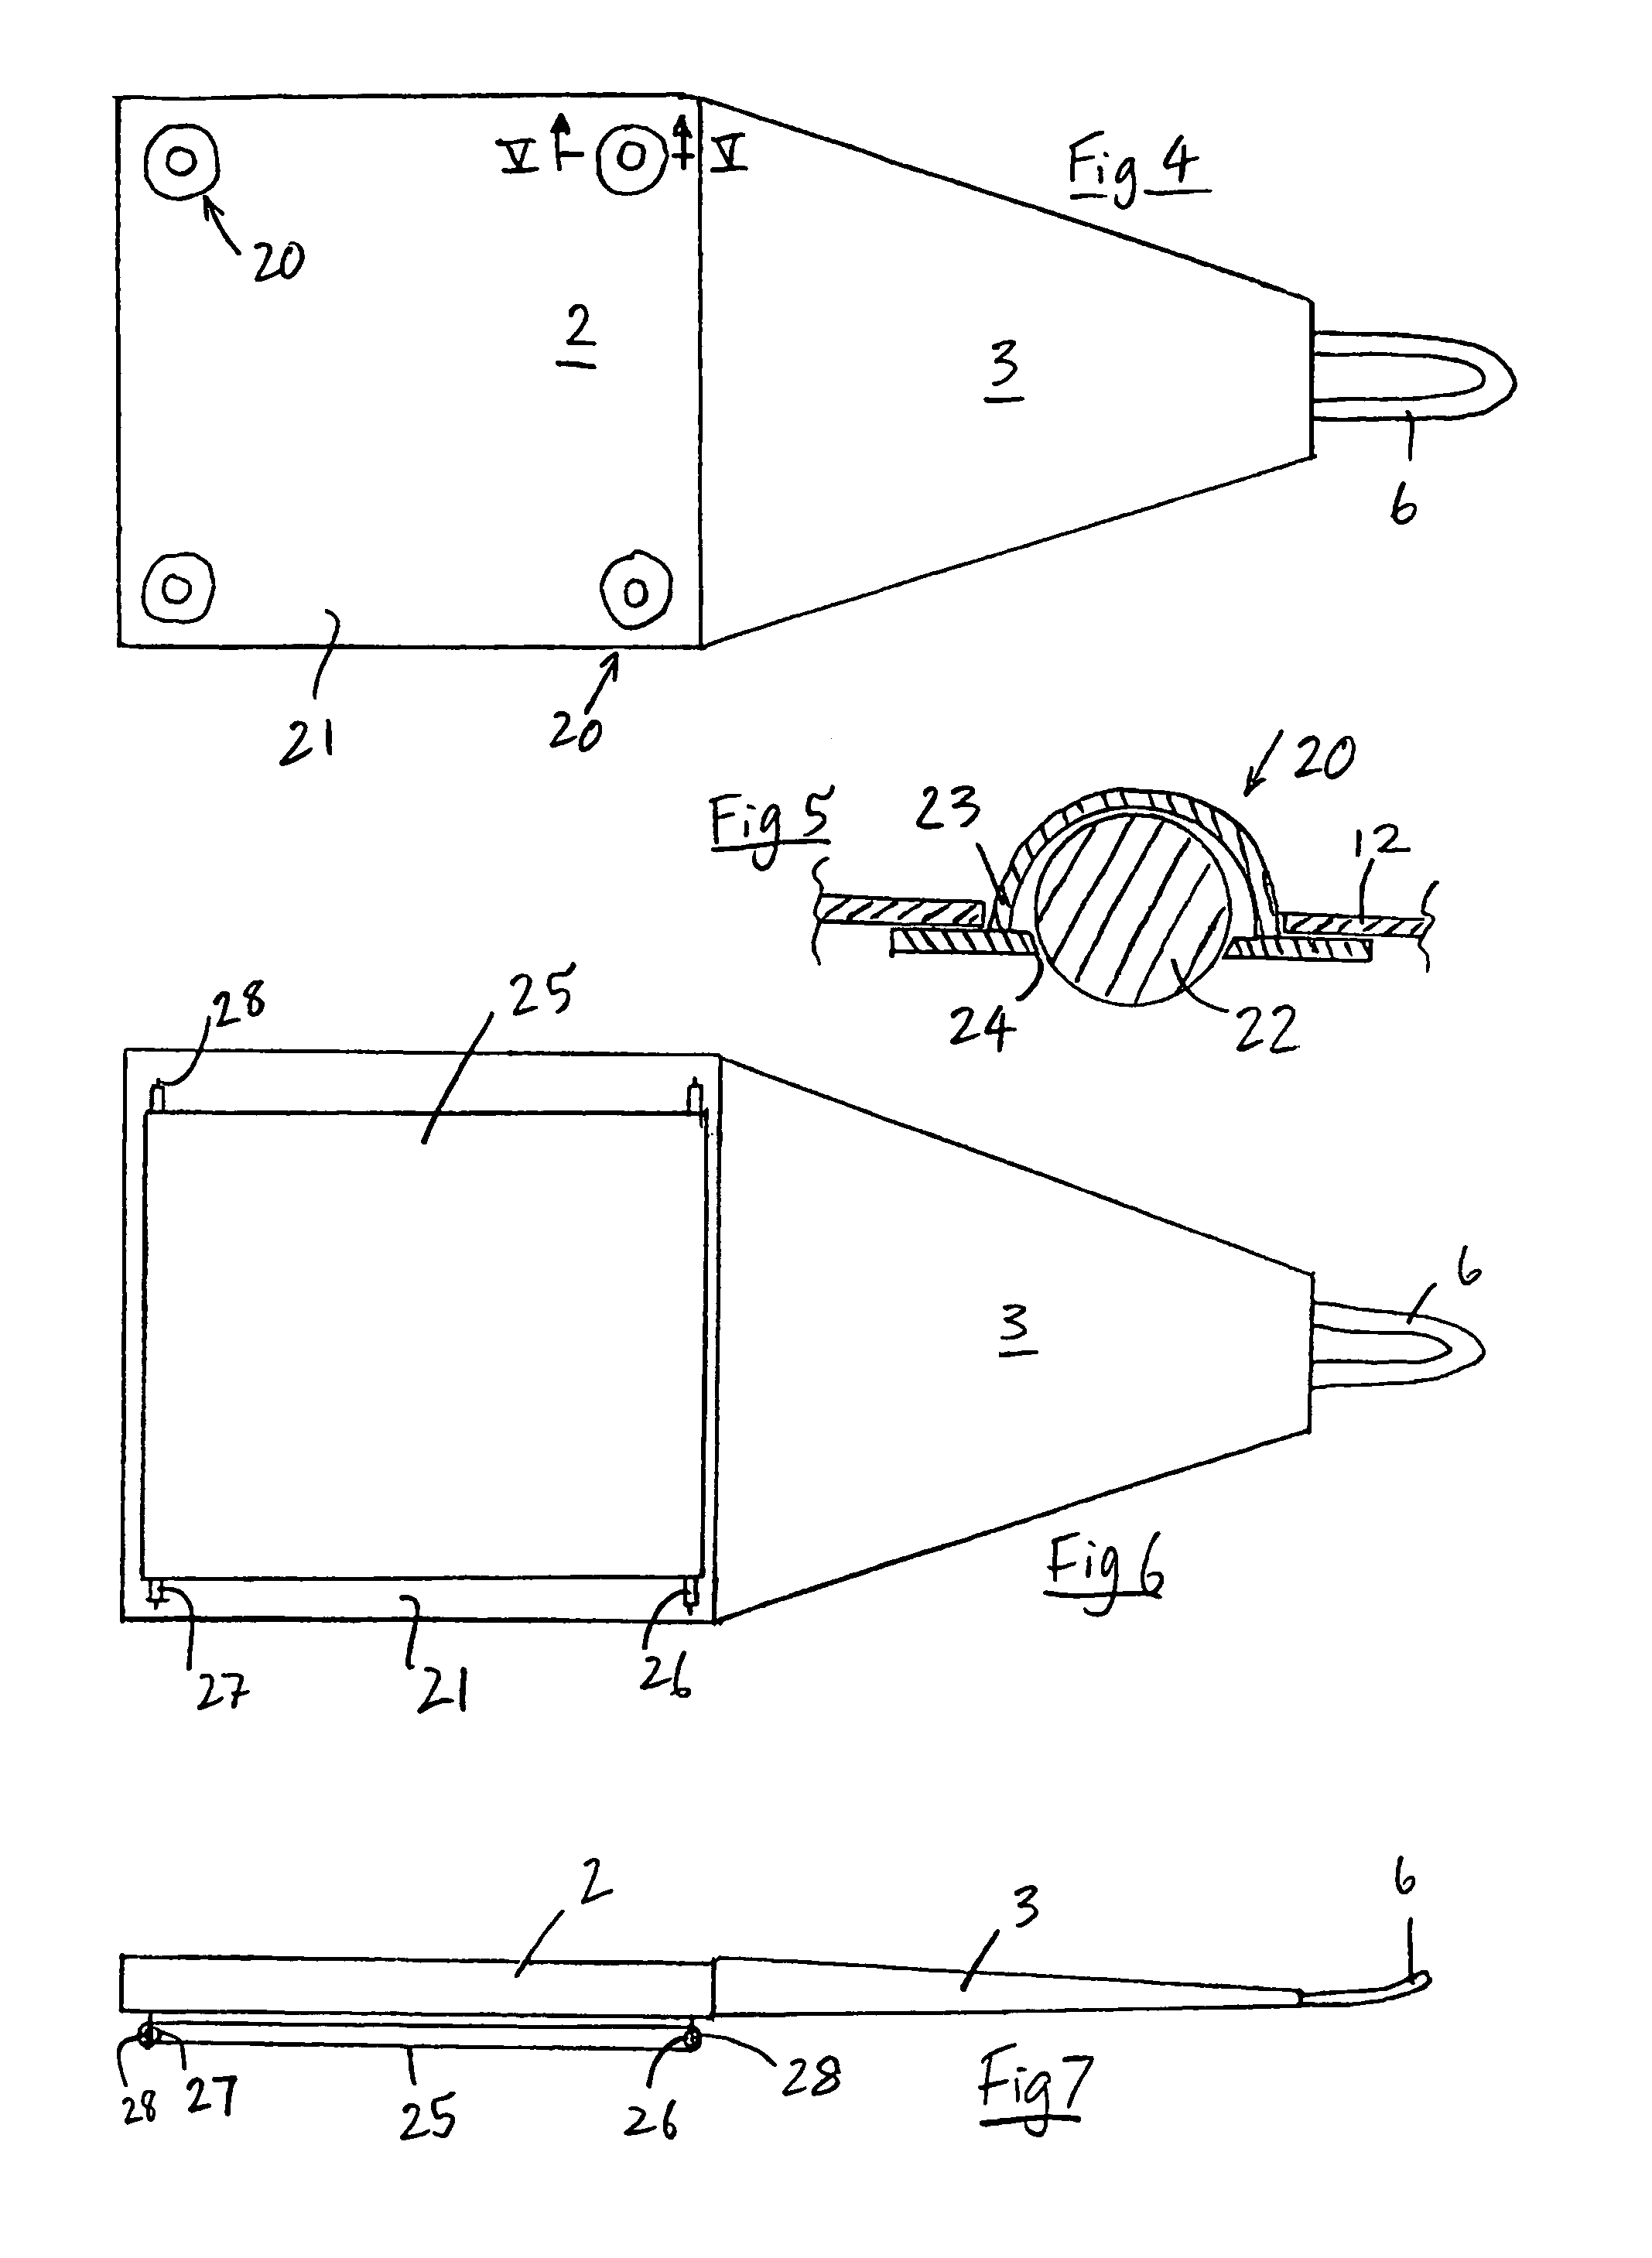 Positioning device for use in radiography